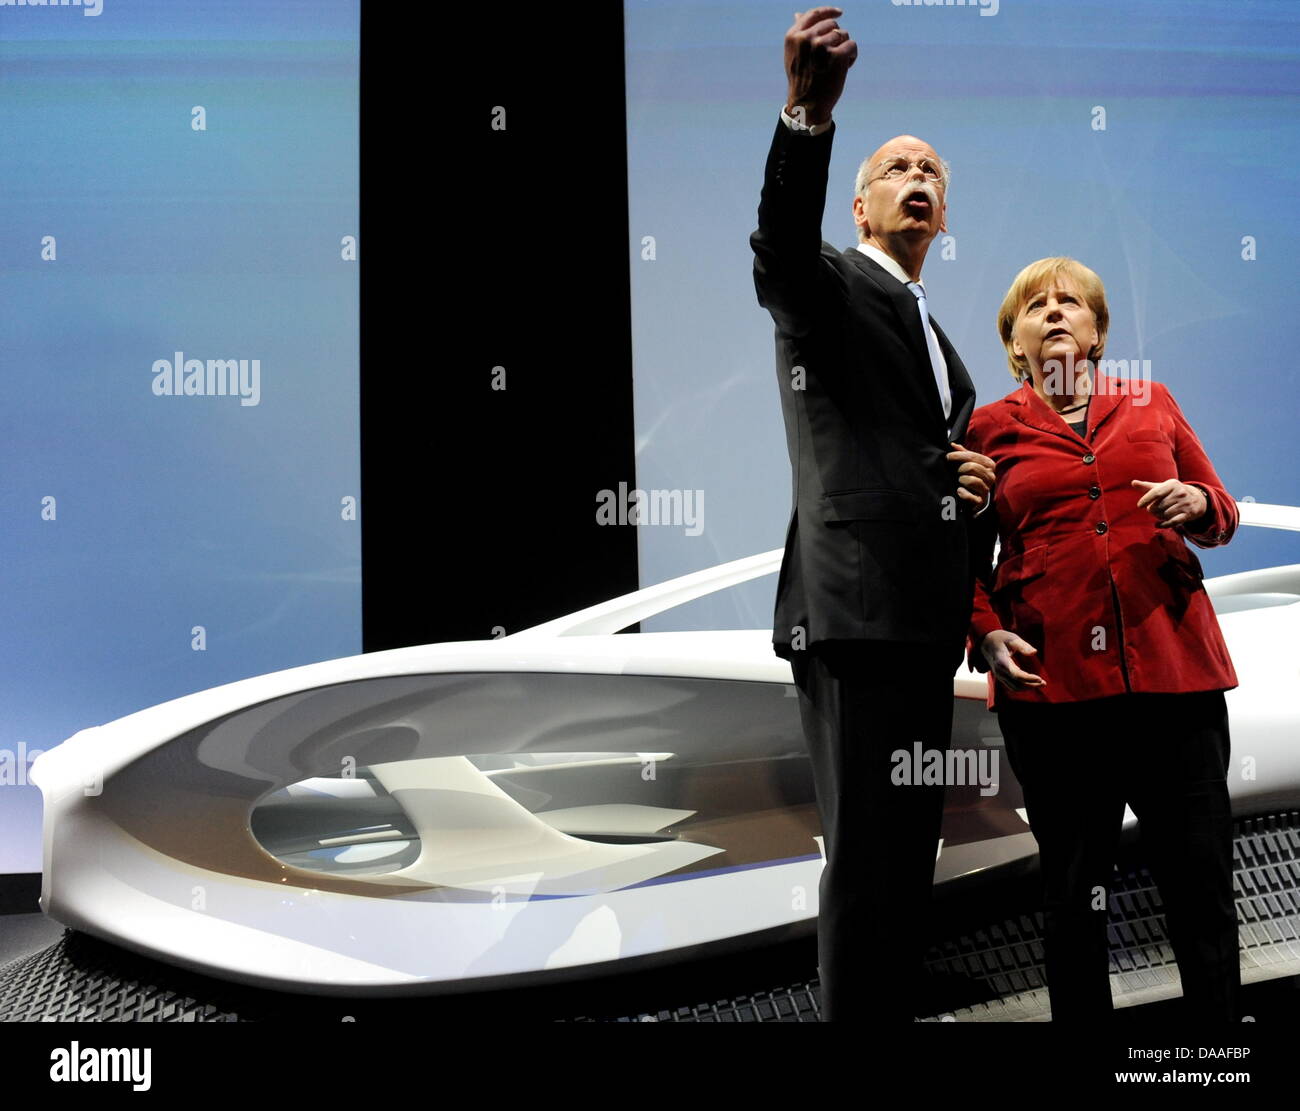 German Chancellor Angela Merkel (R) and Daimler CEO Dieter Zetsche (L) at the celebrations of 125 years of automobile at Mercedes Benz museum in Stuttgart, Germany, 20 January 2011. Photo: Bernd Weissbrod Stock Photo